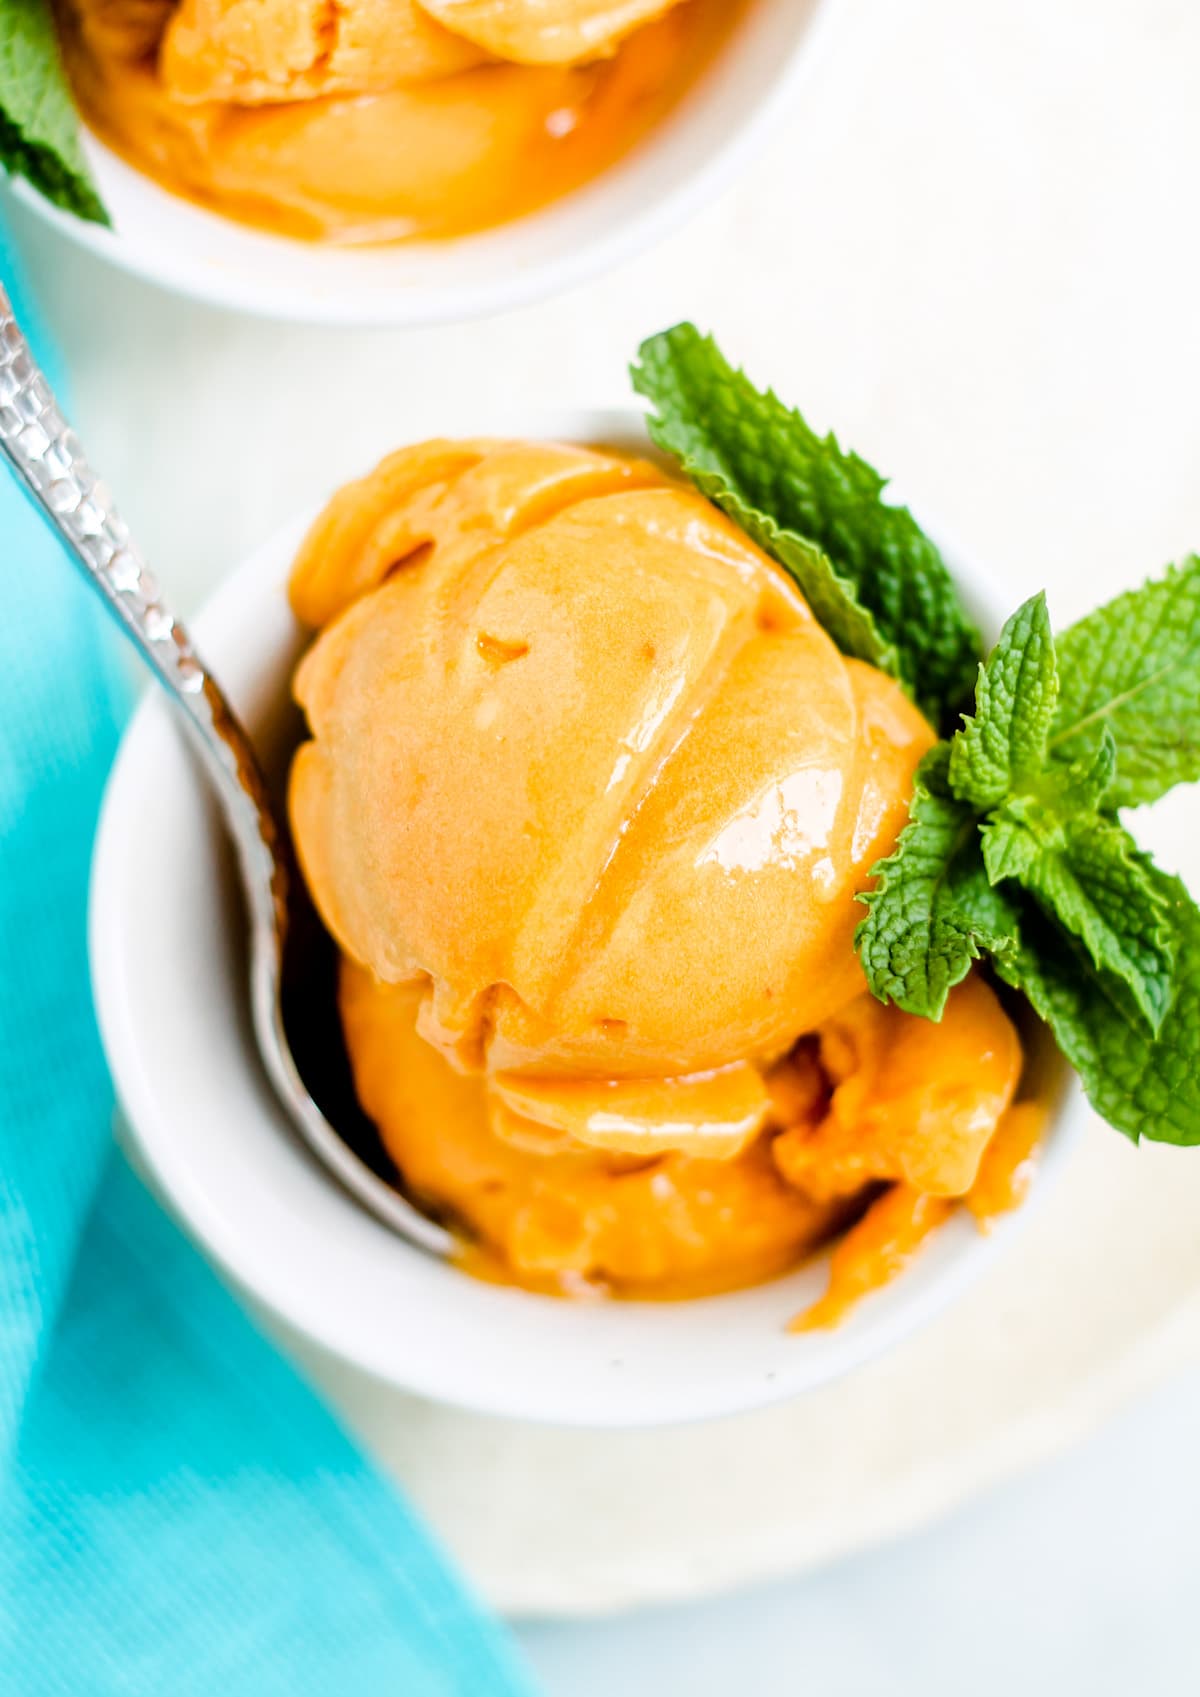 A bowl of Peach Sorbet garnished with fresh mint.